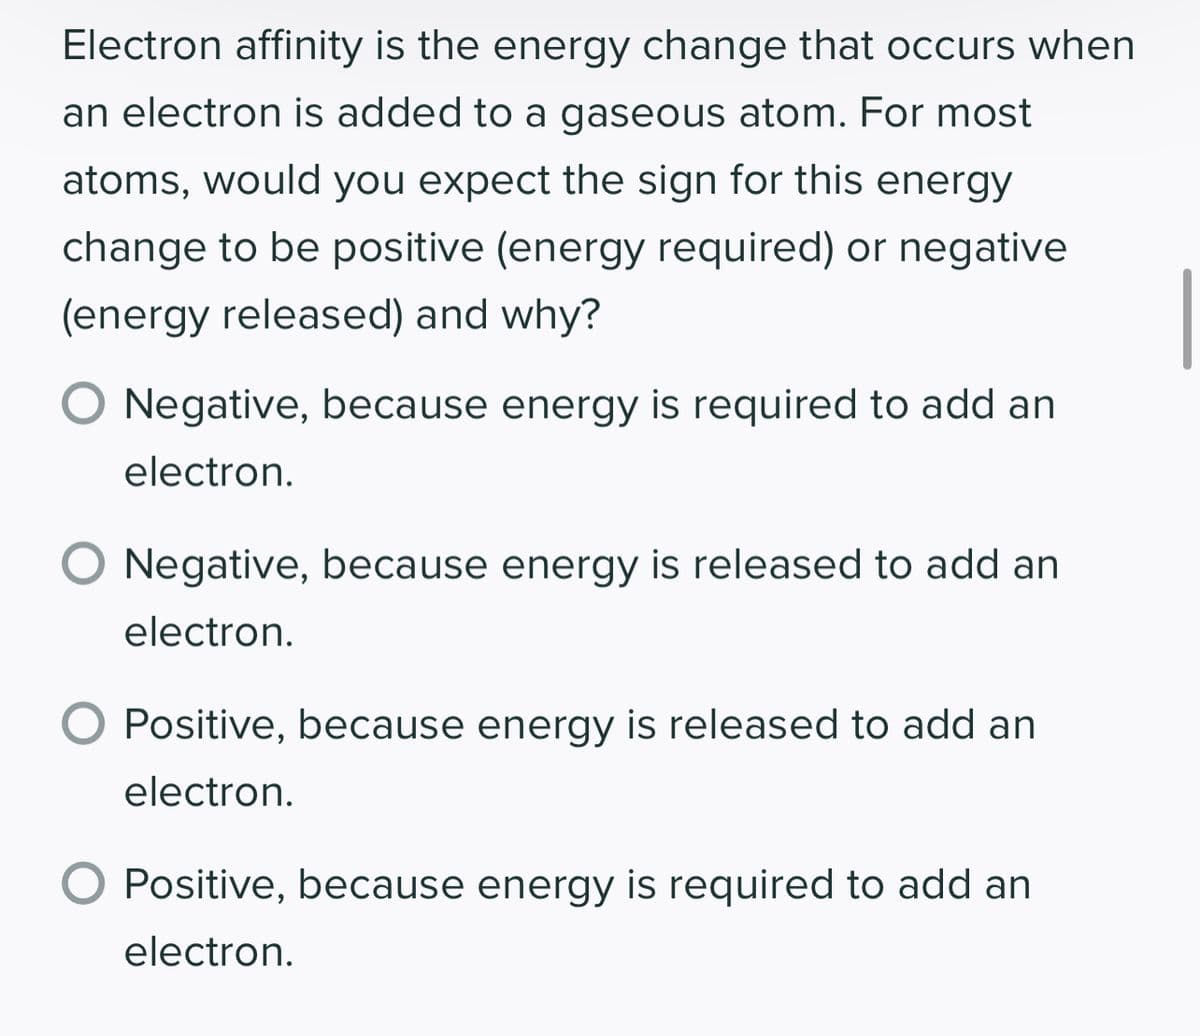 Electron affinity is the energy change that occurs when
an electron is added to a gaseous atom. For most
atoms, would you expect the sign for this energy
change to be positive (energy required) or negative
(energy released) and why?
O Negative, because energy is required to add an
electron.
O Negative, because energy is released to add an
electron.
Positive, because energy is released to add an
electron.
Positive, because energy is required to add an
electron.